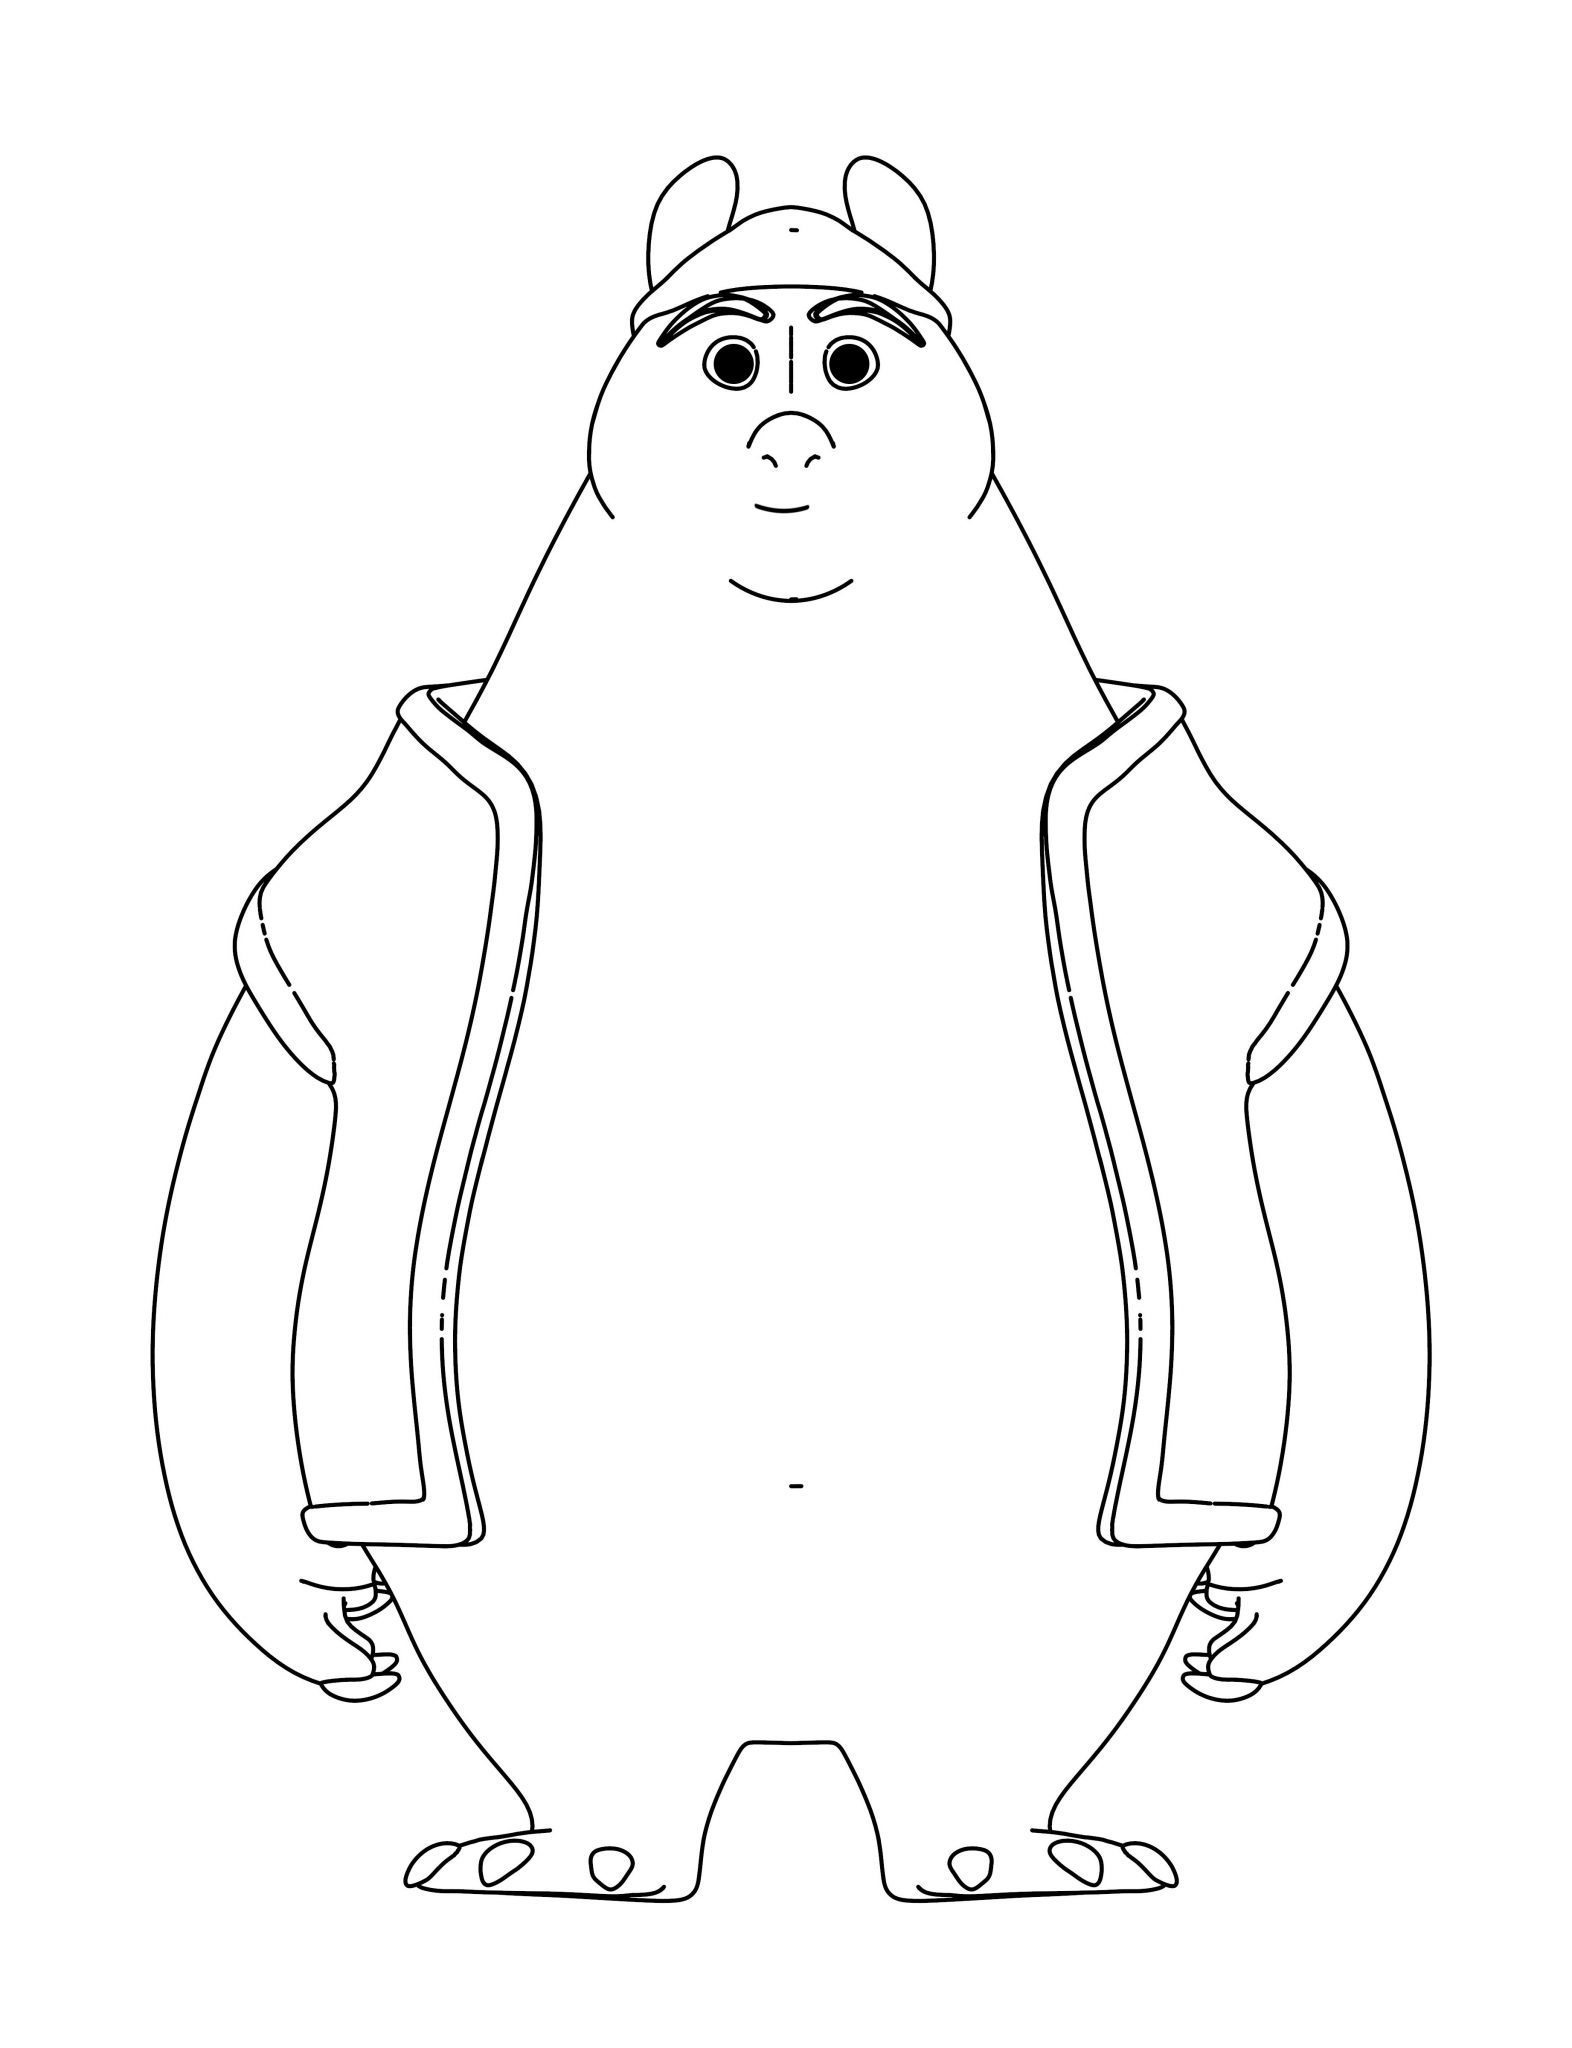 bear cartoon character front coloring page - Wecoloringpage.com